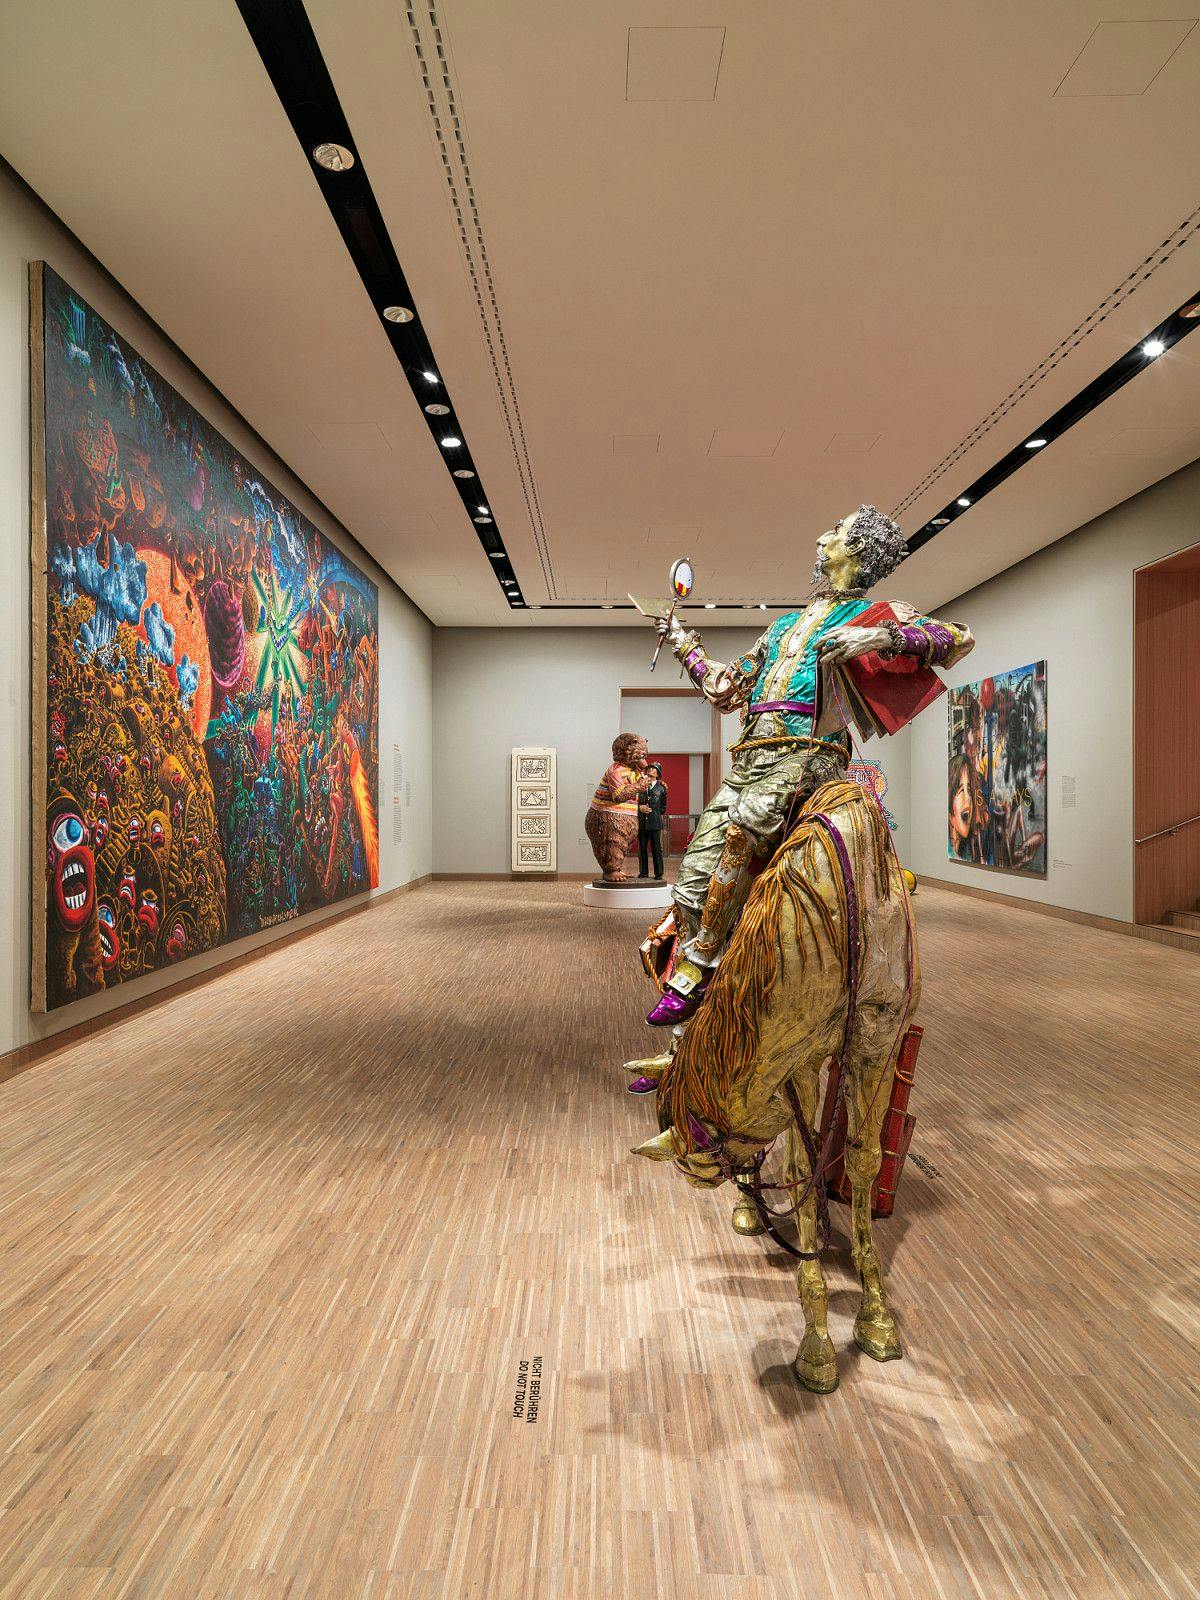 An installation view of the exhibition, The 80s: Art of the Eighties, at the Albertina Modern in Vienna, dated 2021 to 2022.